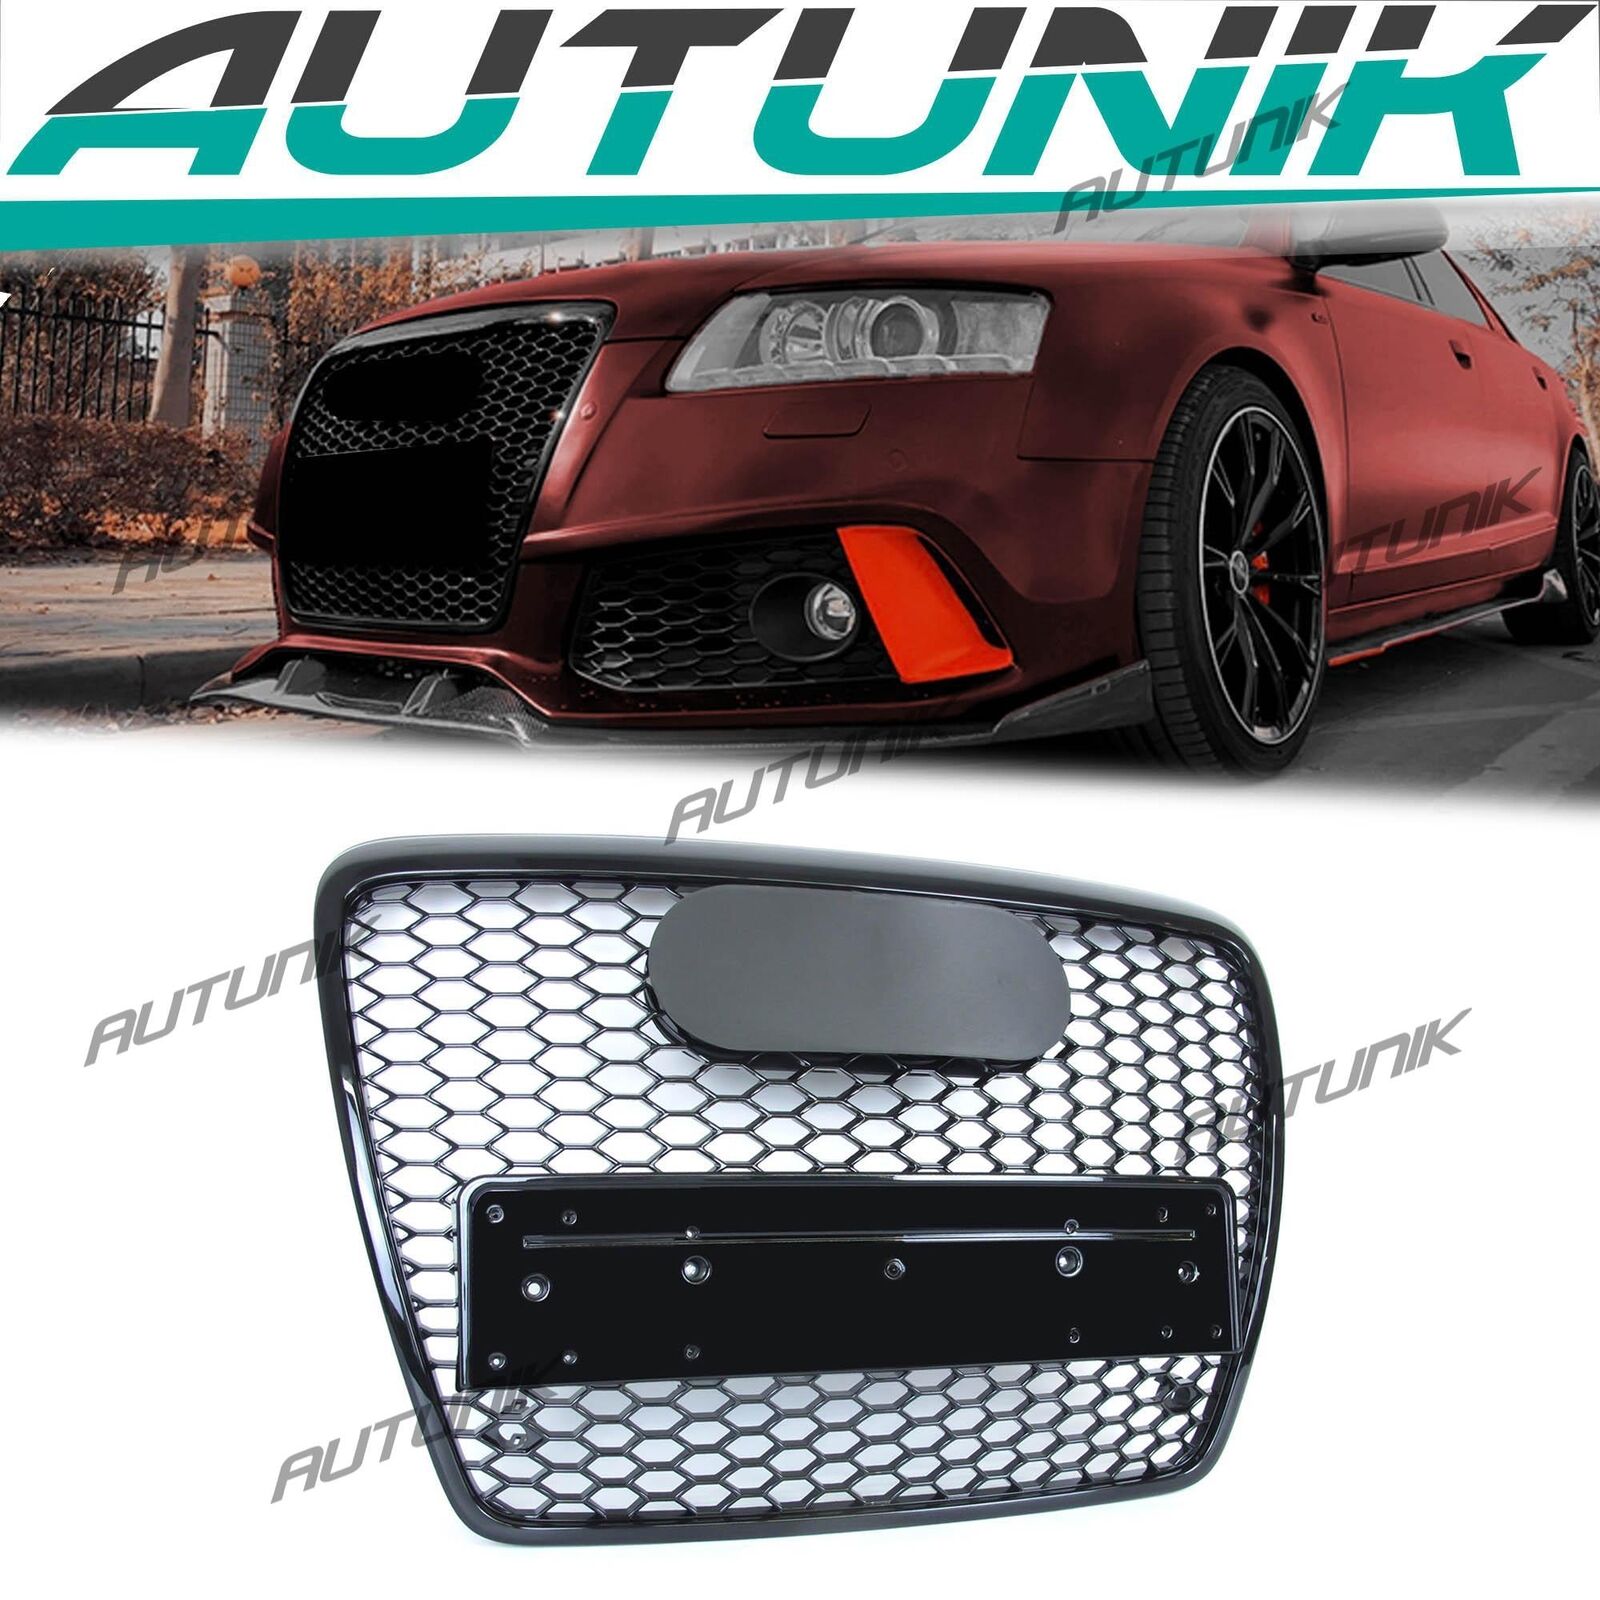 Glossy Black Honeycomb Front Mesh Grille for Audi A6 C6 2005-2011